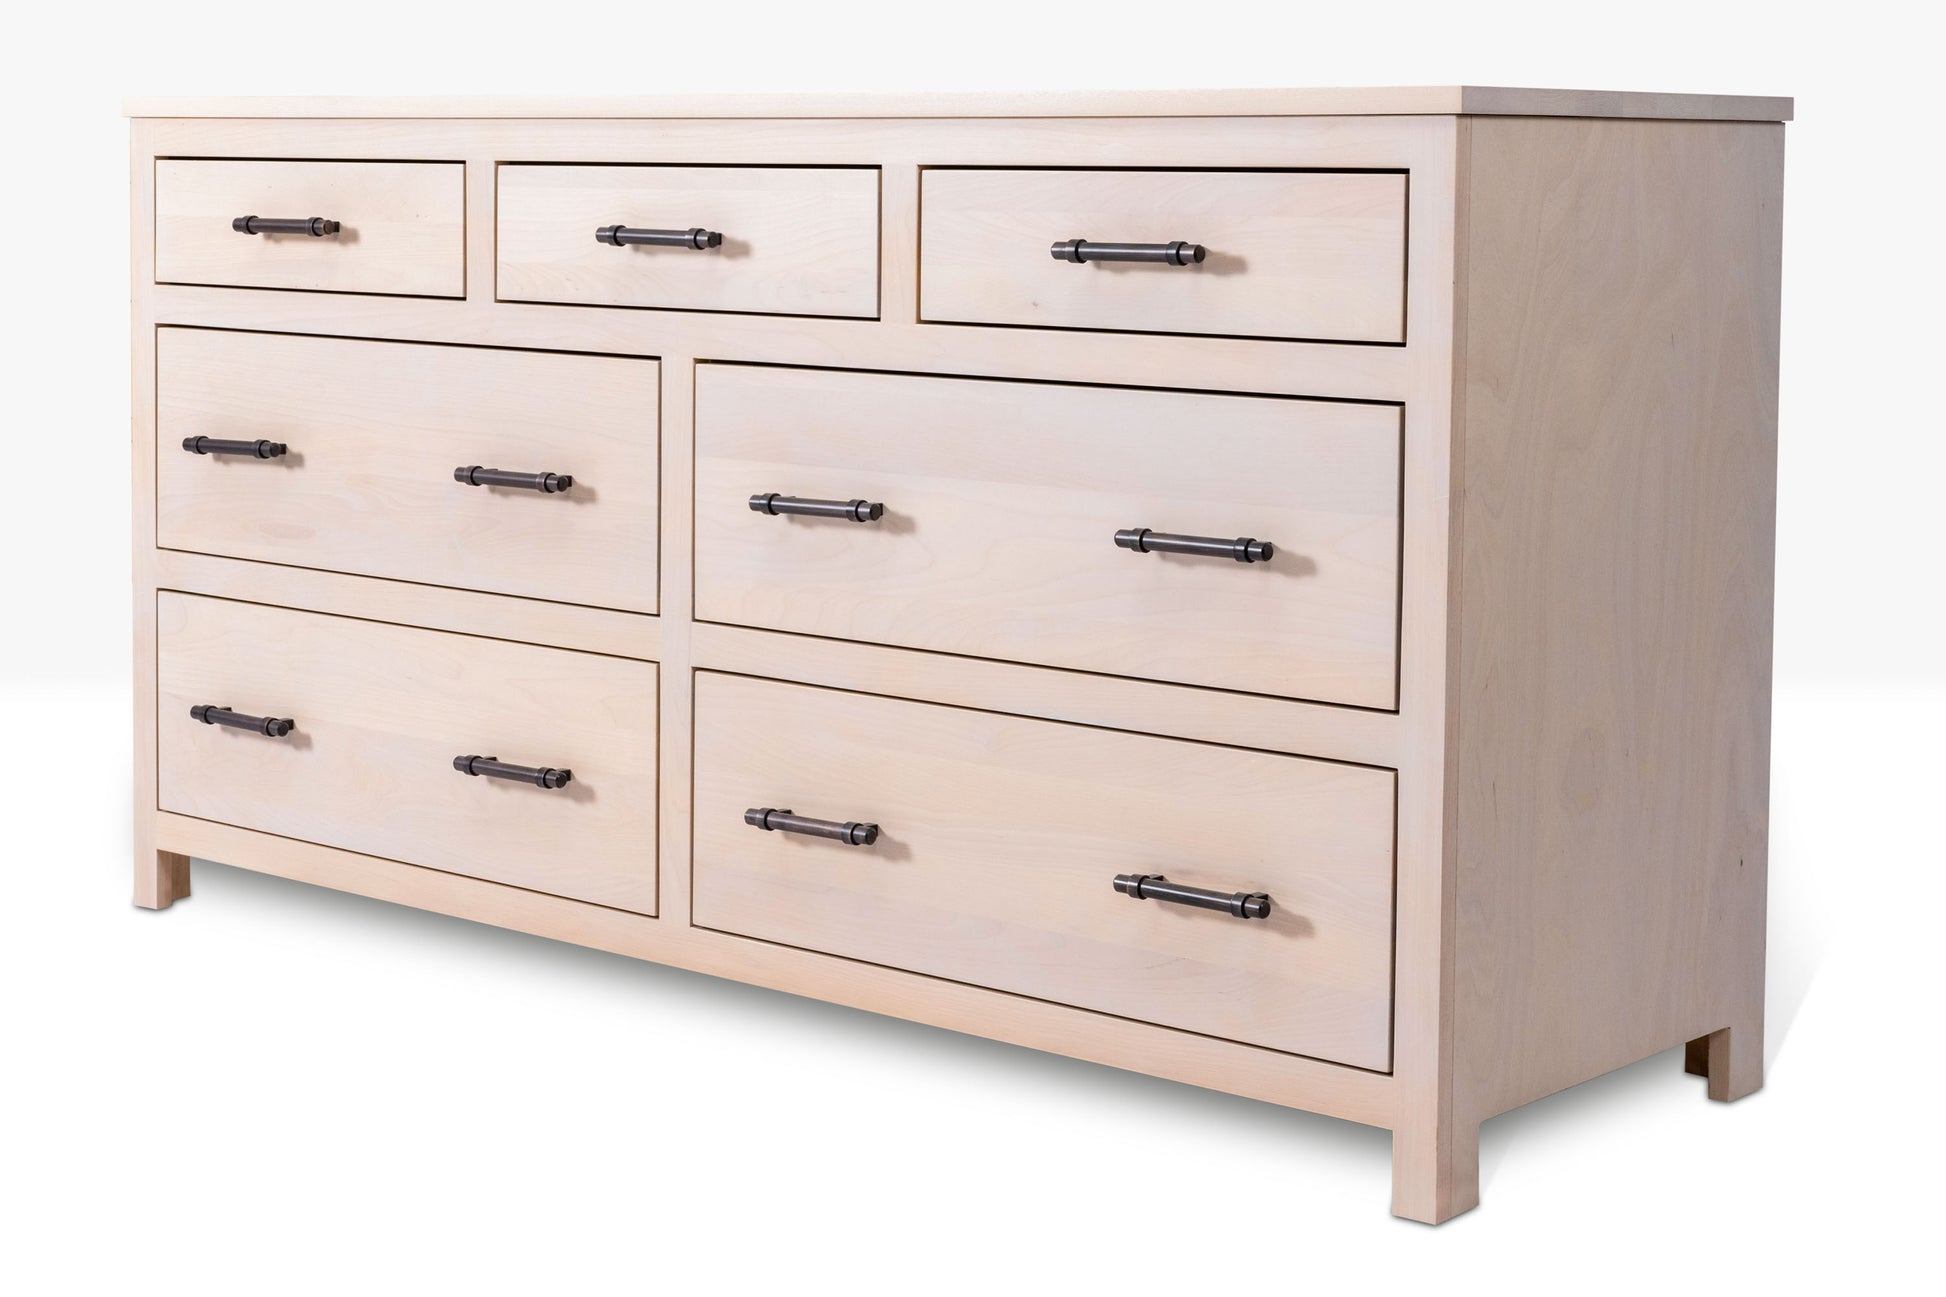 Acadia Tremont Seven Drawer Dresser features four large drawers and three small drawers on the top row. Pictured in Sandstone Finish close up to highlight details.